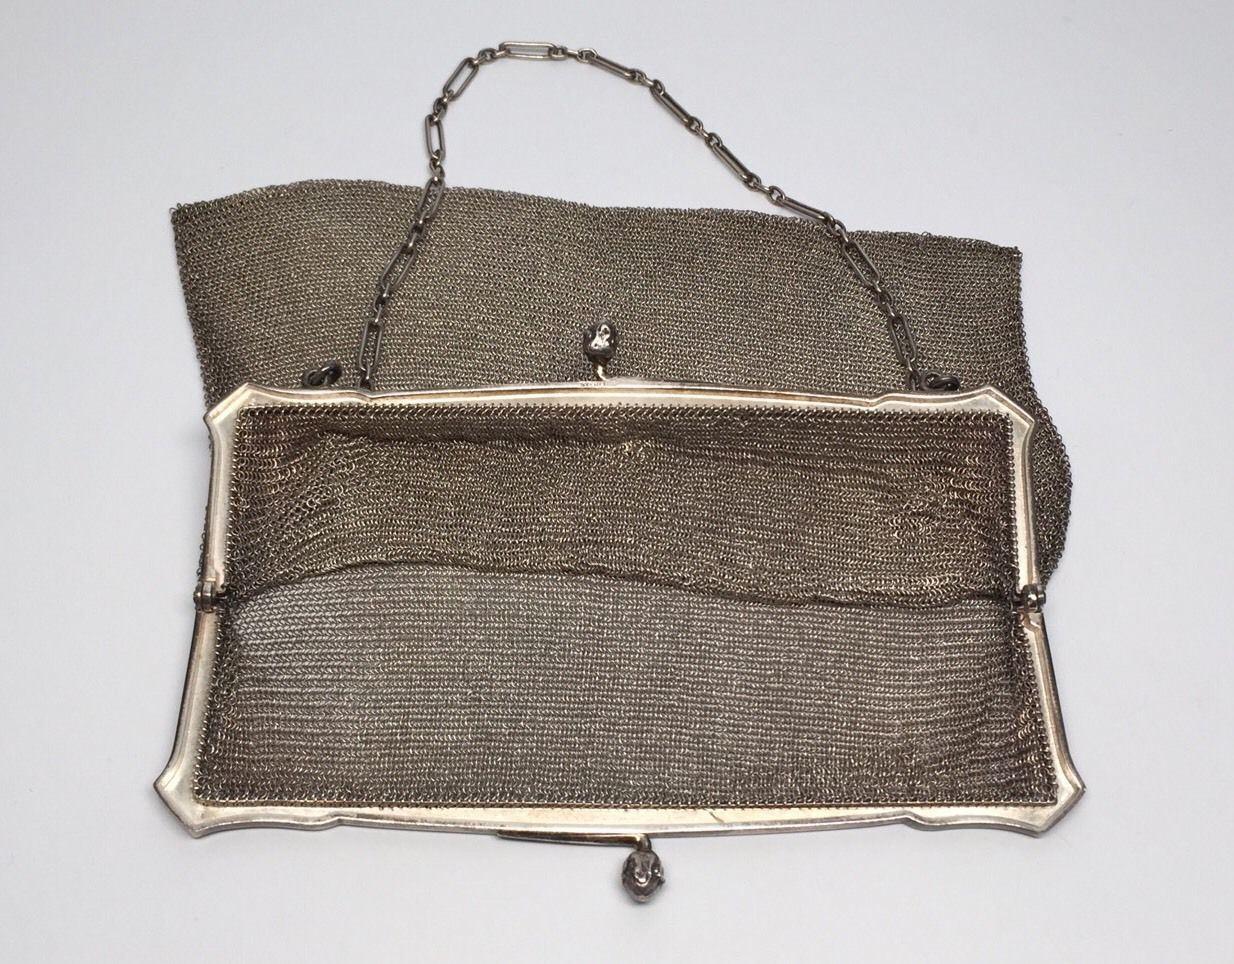 Antique S.E. Kaupe sterling silver chainmail purse. Marked: S.E. KAUPE

Measures: 15.9